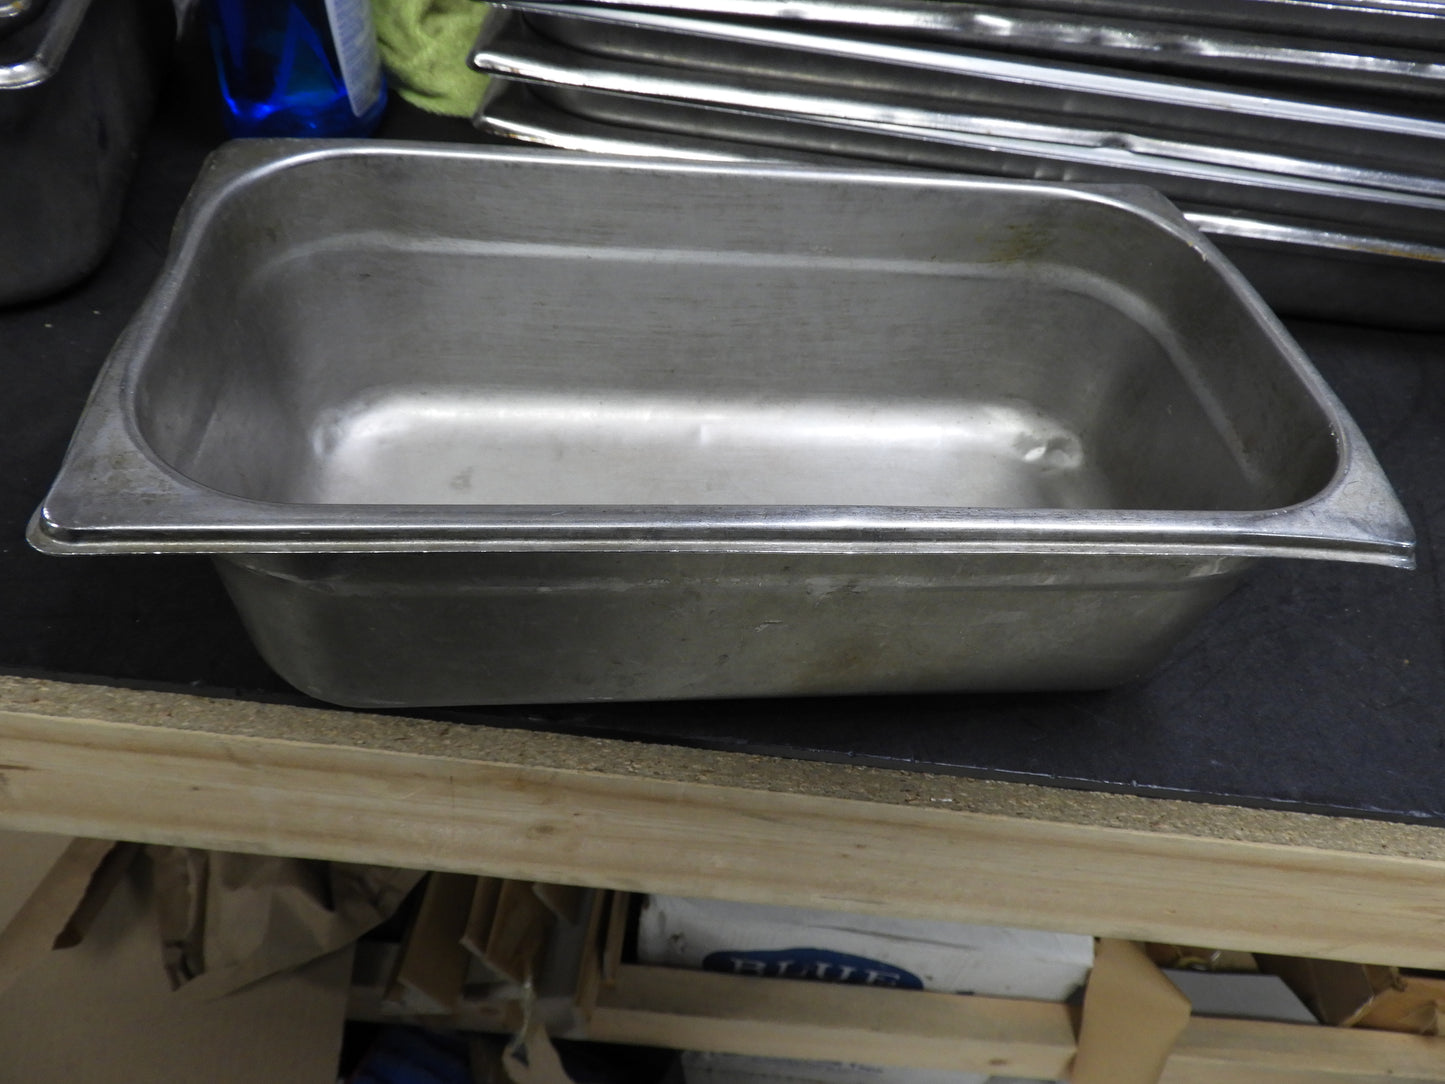 1/3 Size Stainless Steel Steam Table / Hotel Pan - 6" Deep